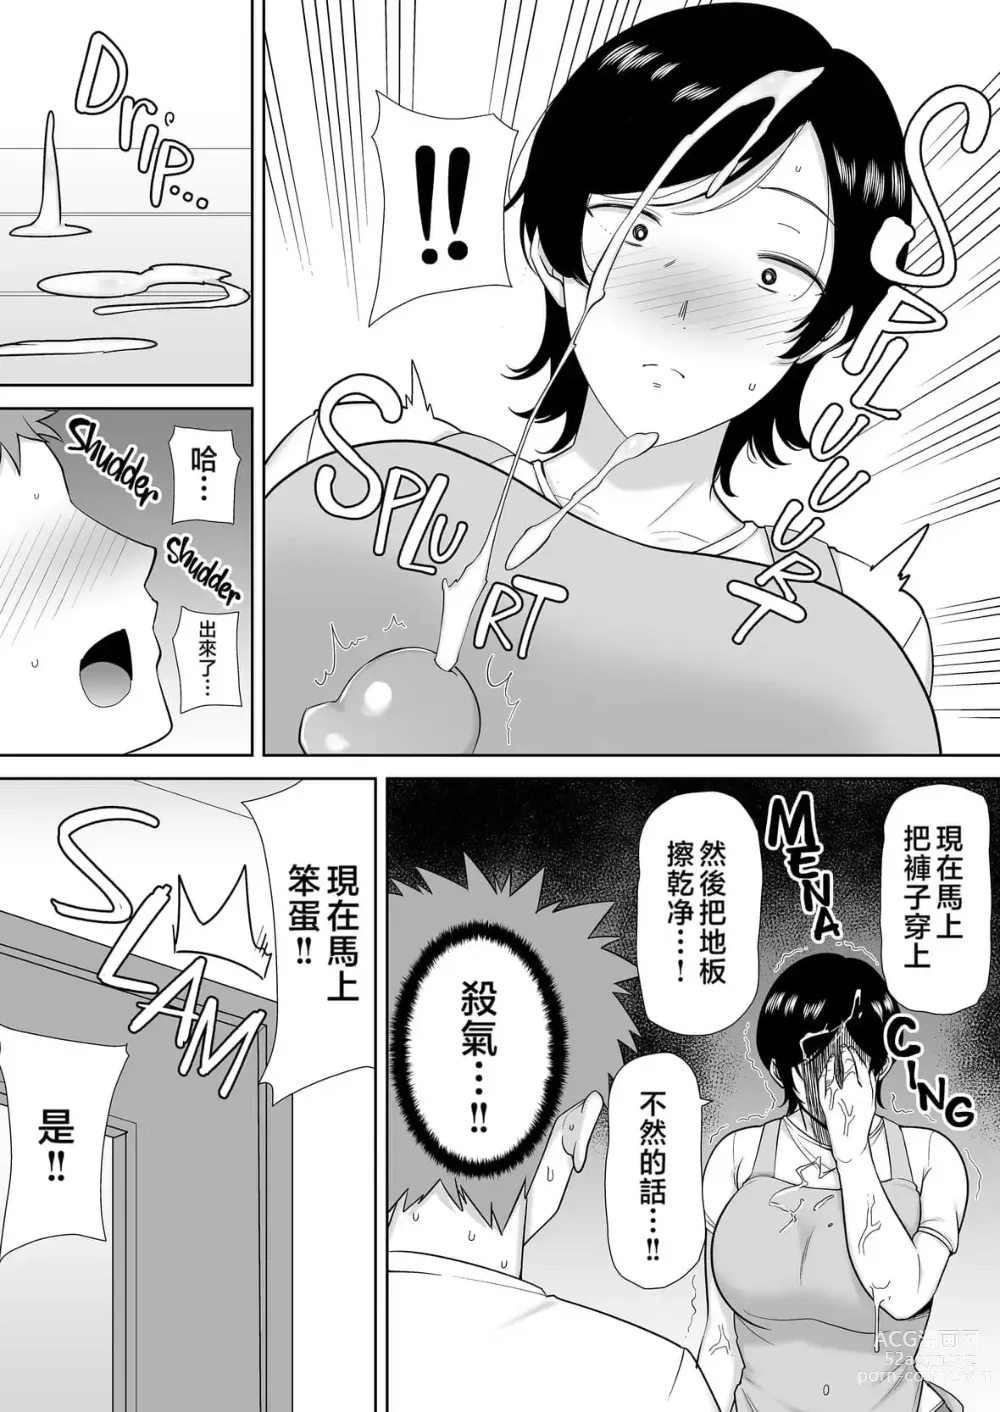 Page 6 of doujinshi even mom want a litle lovin